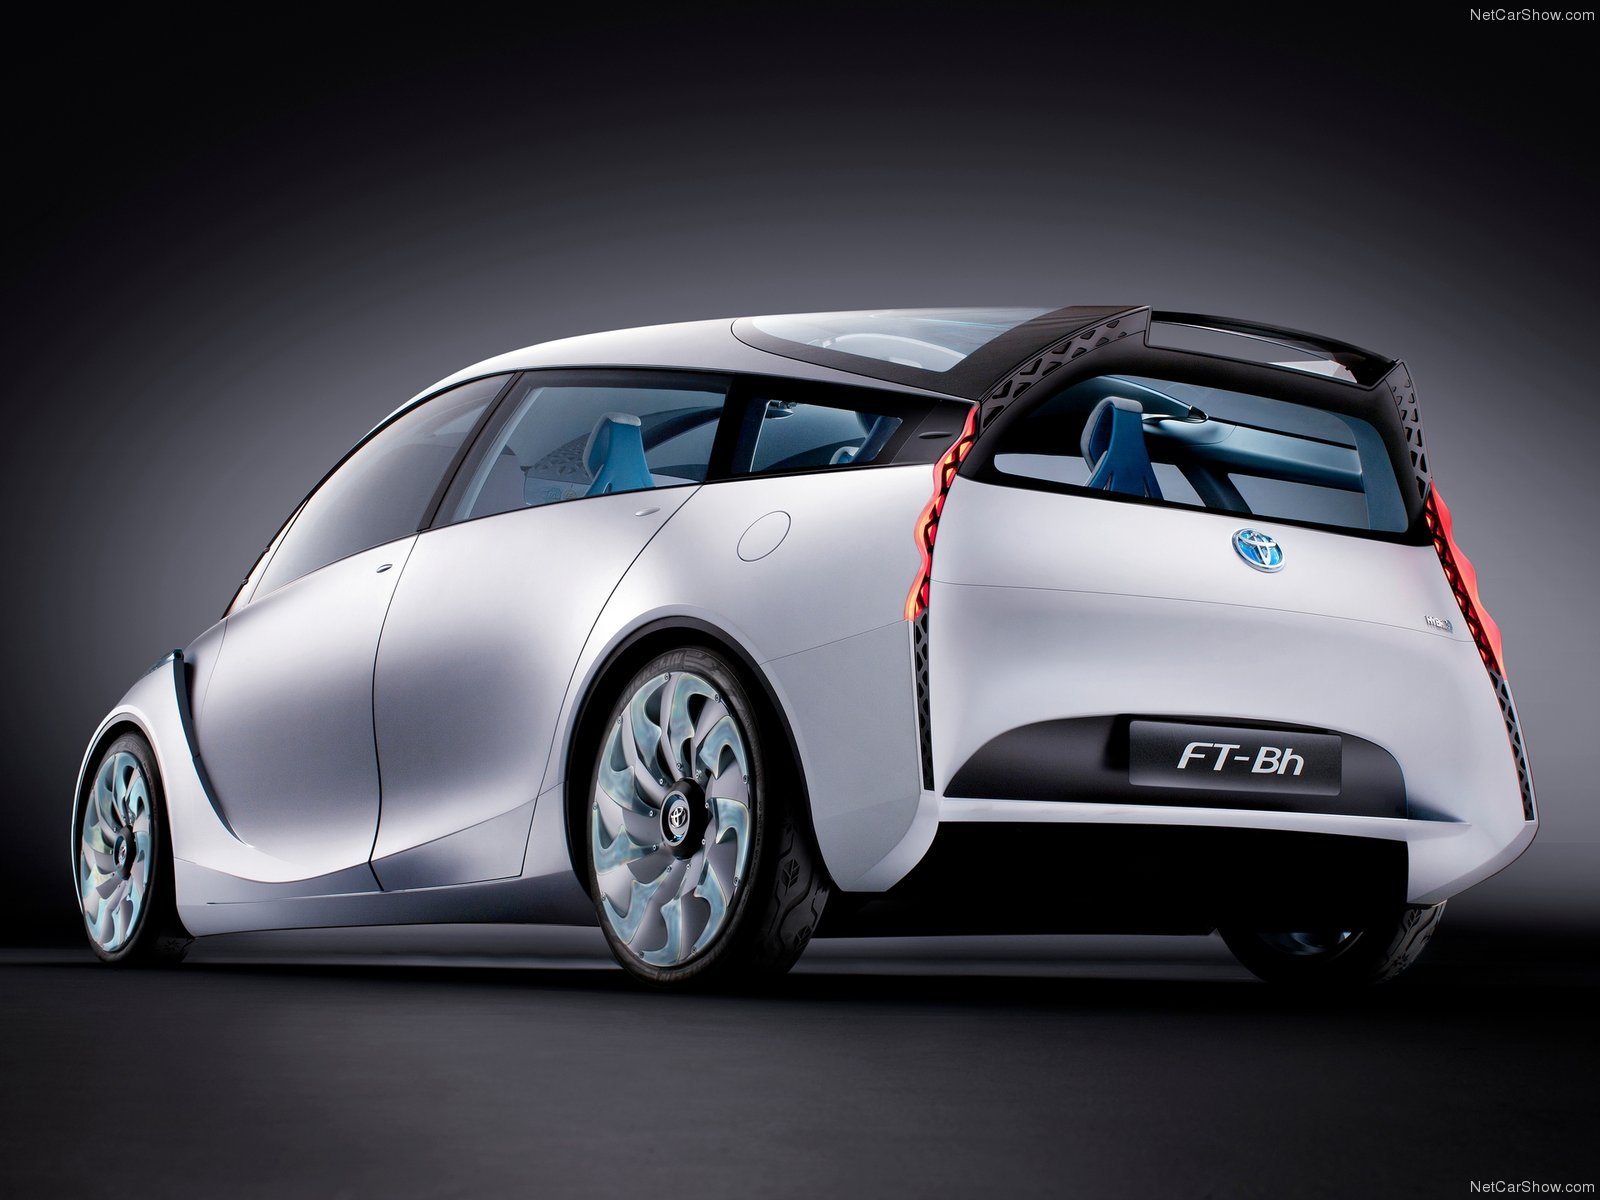 toyota, Ft bh, Concept, Cars, 2012 Wallpaper